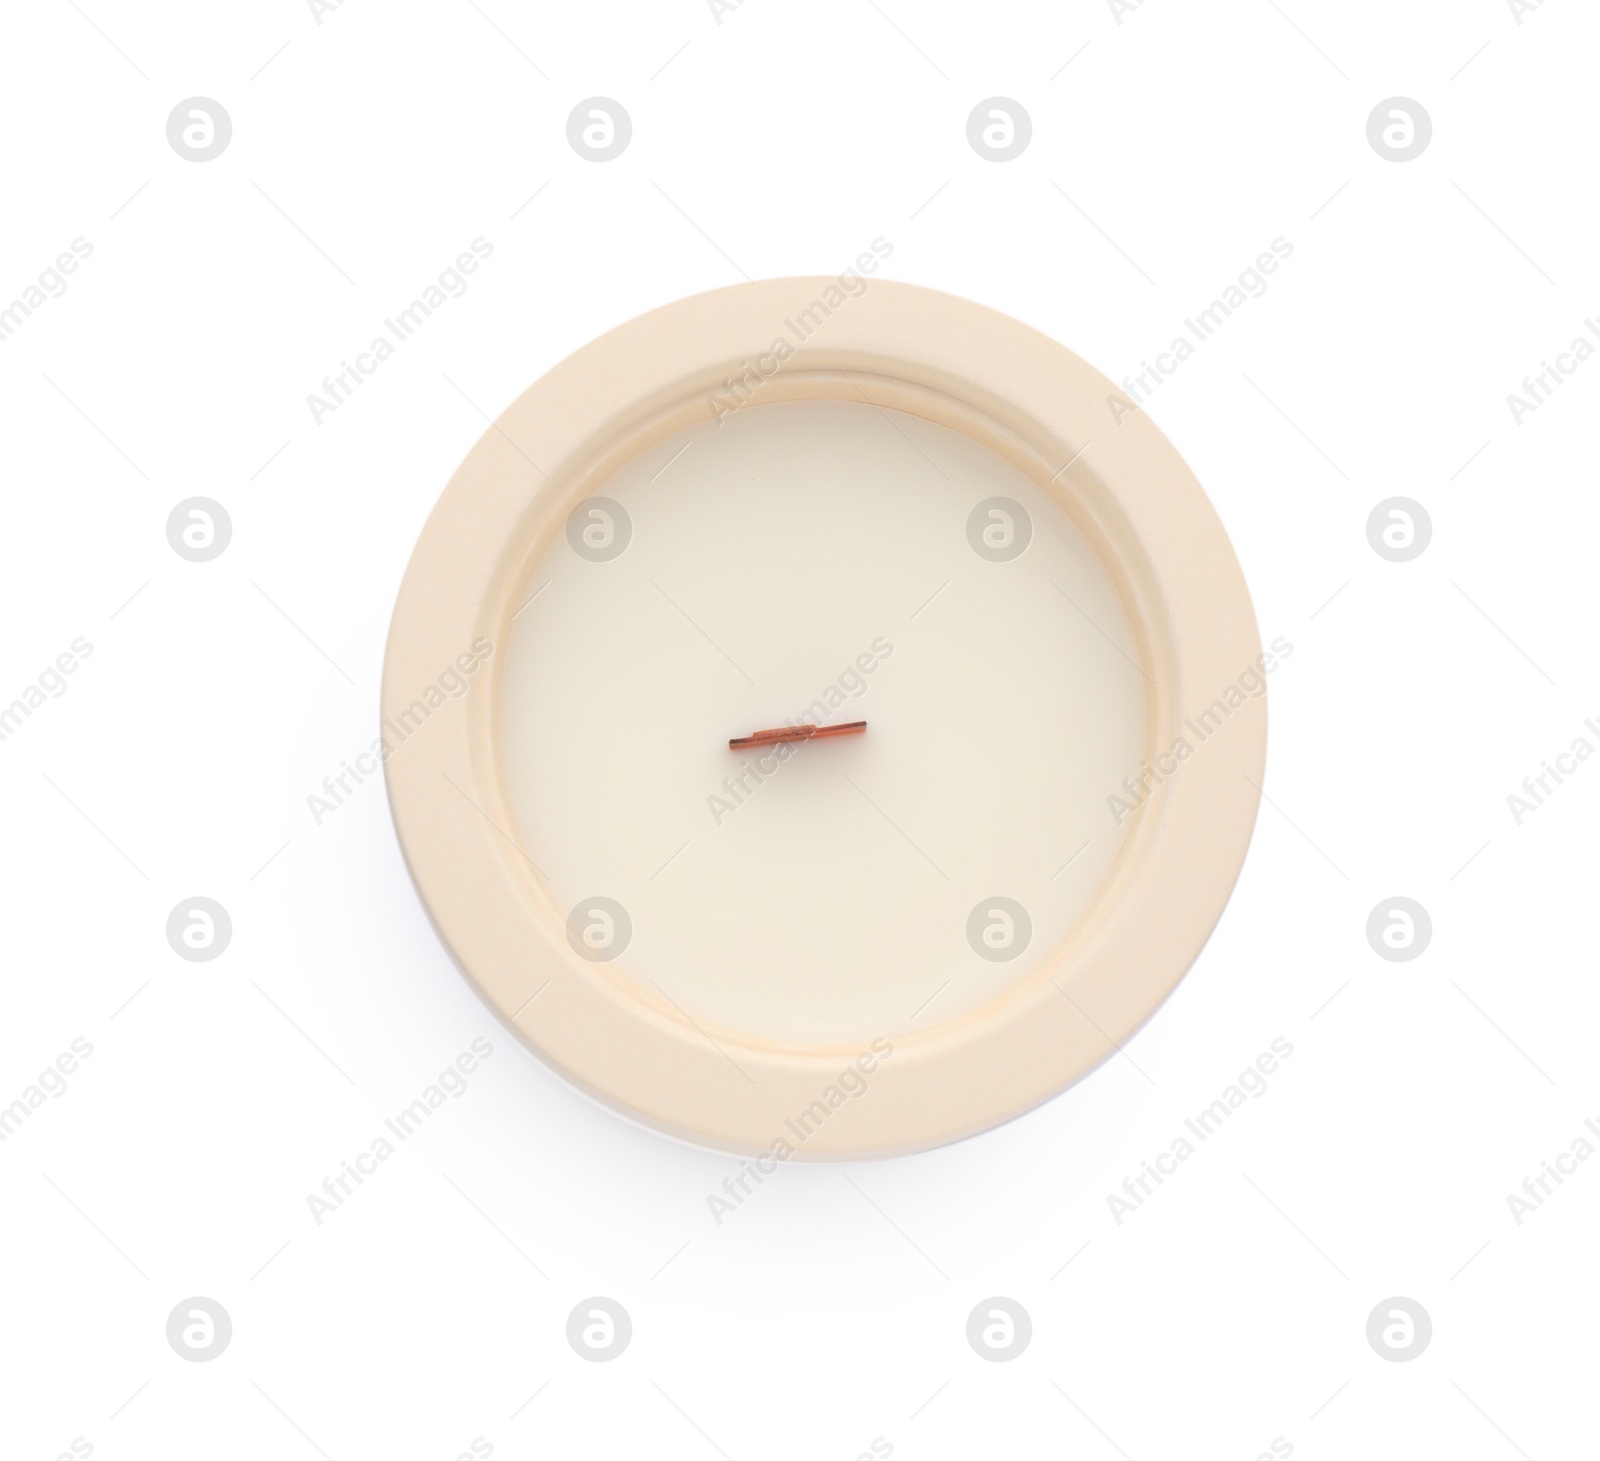 Photo of Aromatic soy candle with wooden wick isolated on white, top view